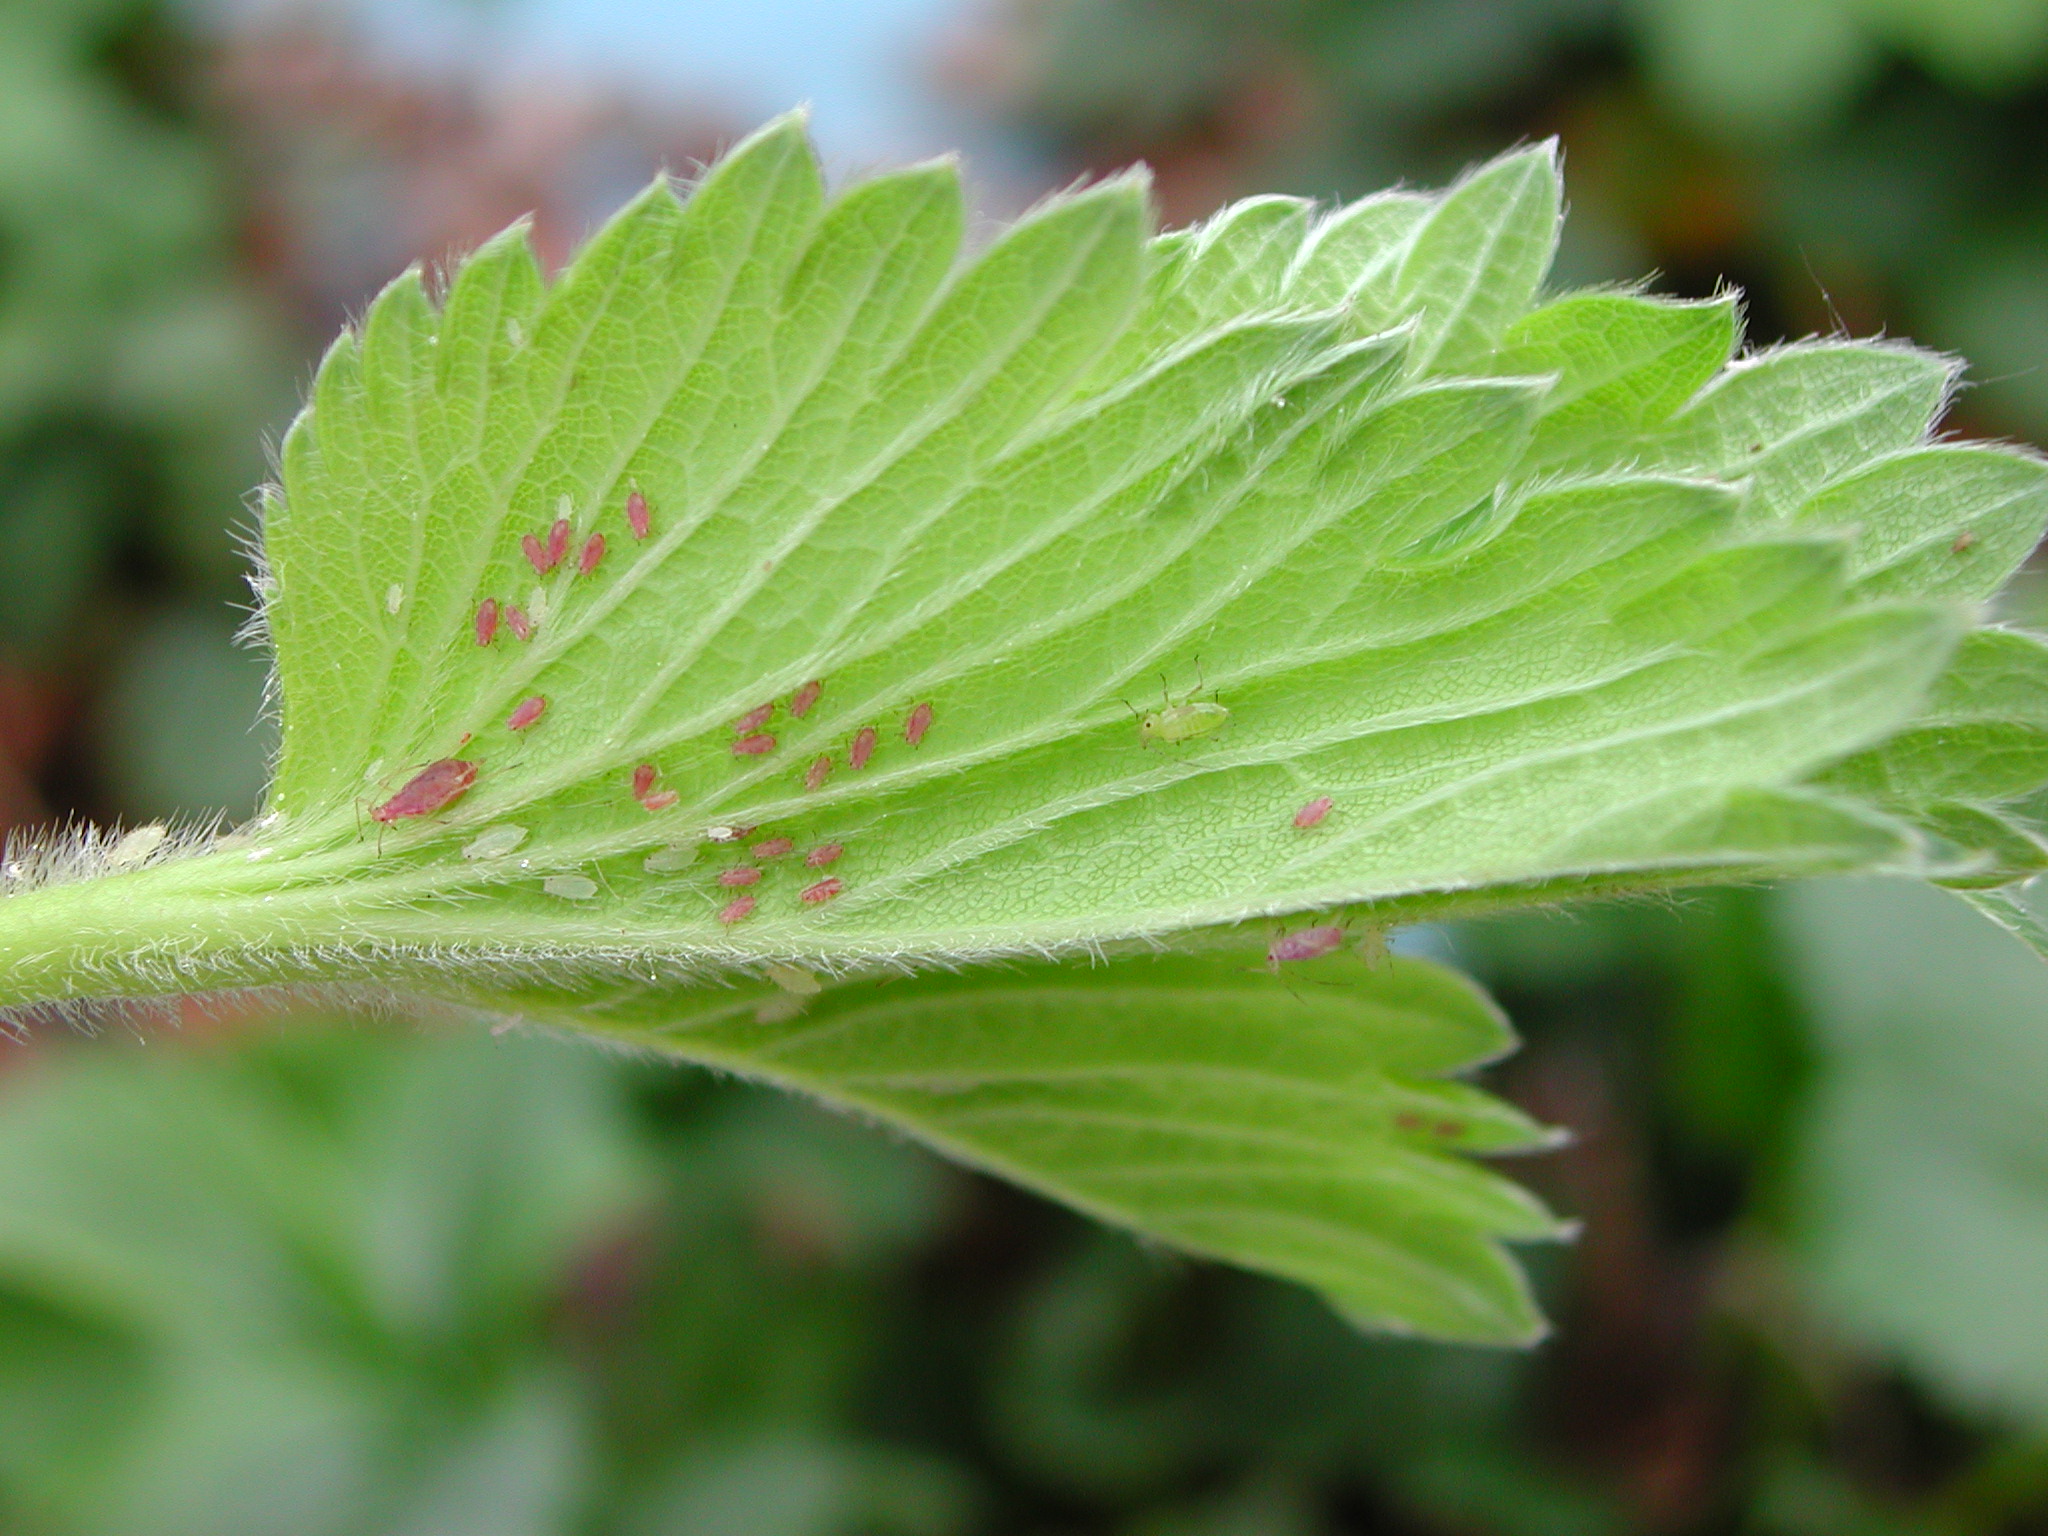 Mixed pink and green forms of potato aphids on a strawberry leaf. Copyright NIAB EMR.